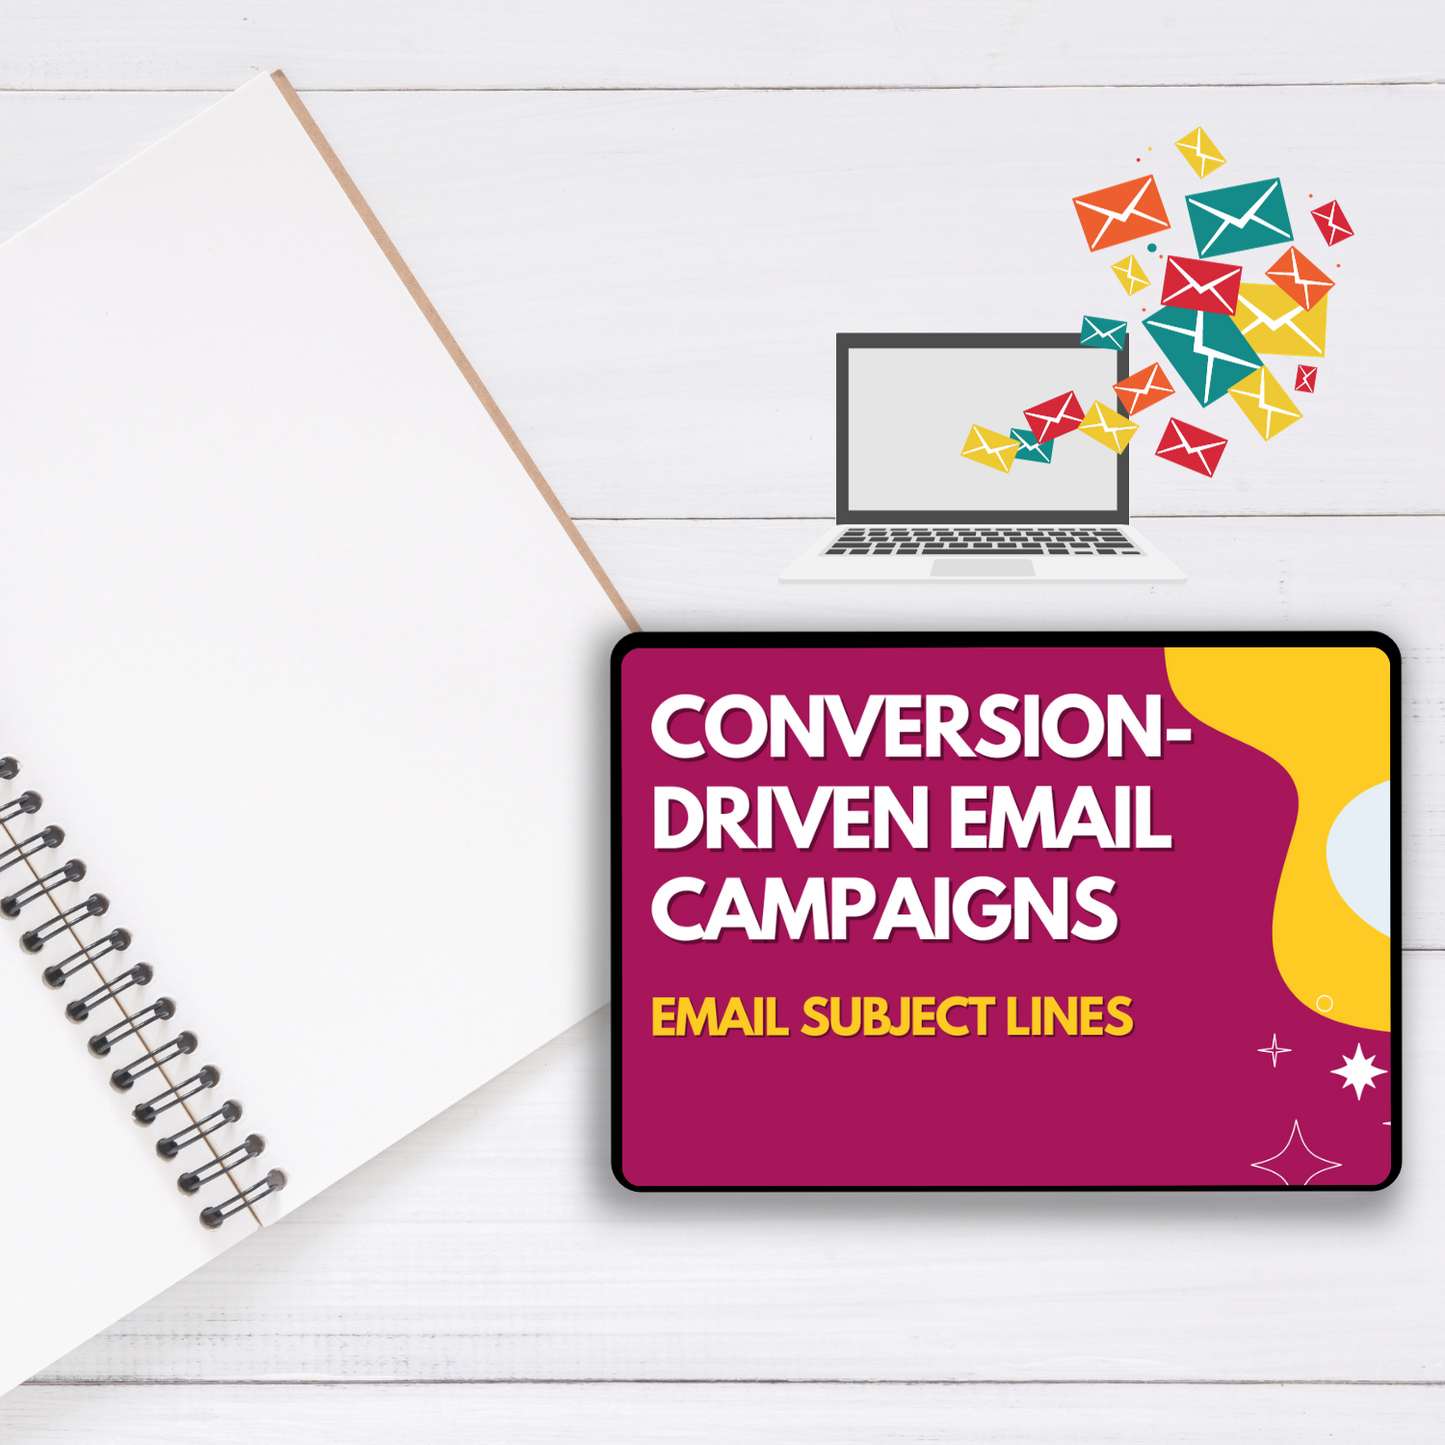 Conversion-Driven Email Campaigns